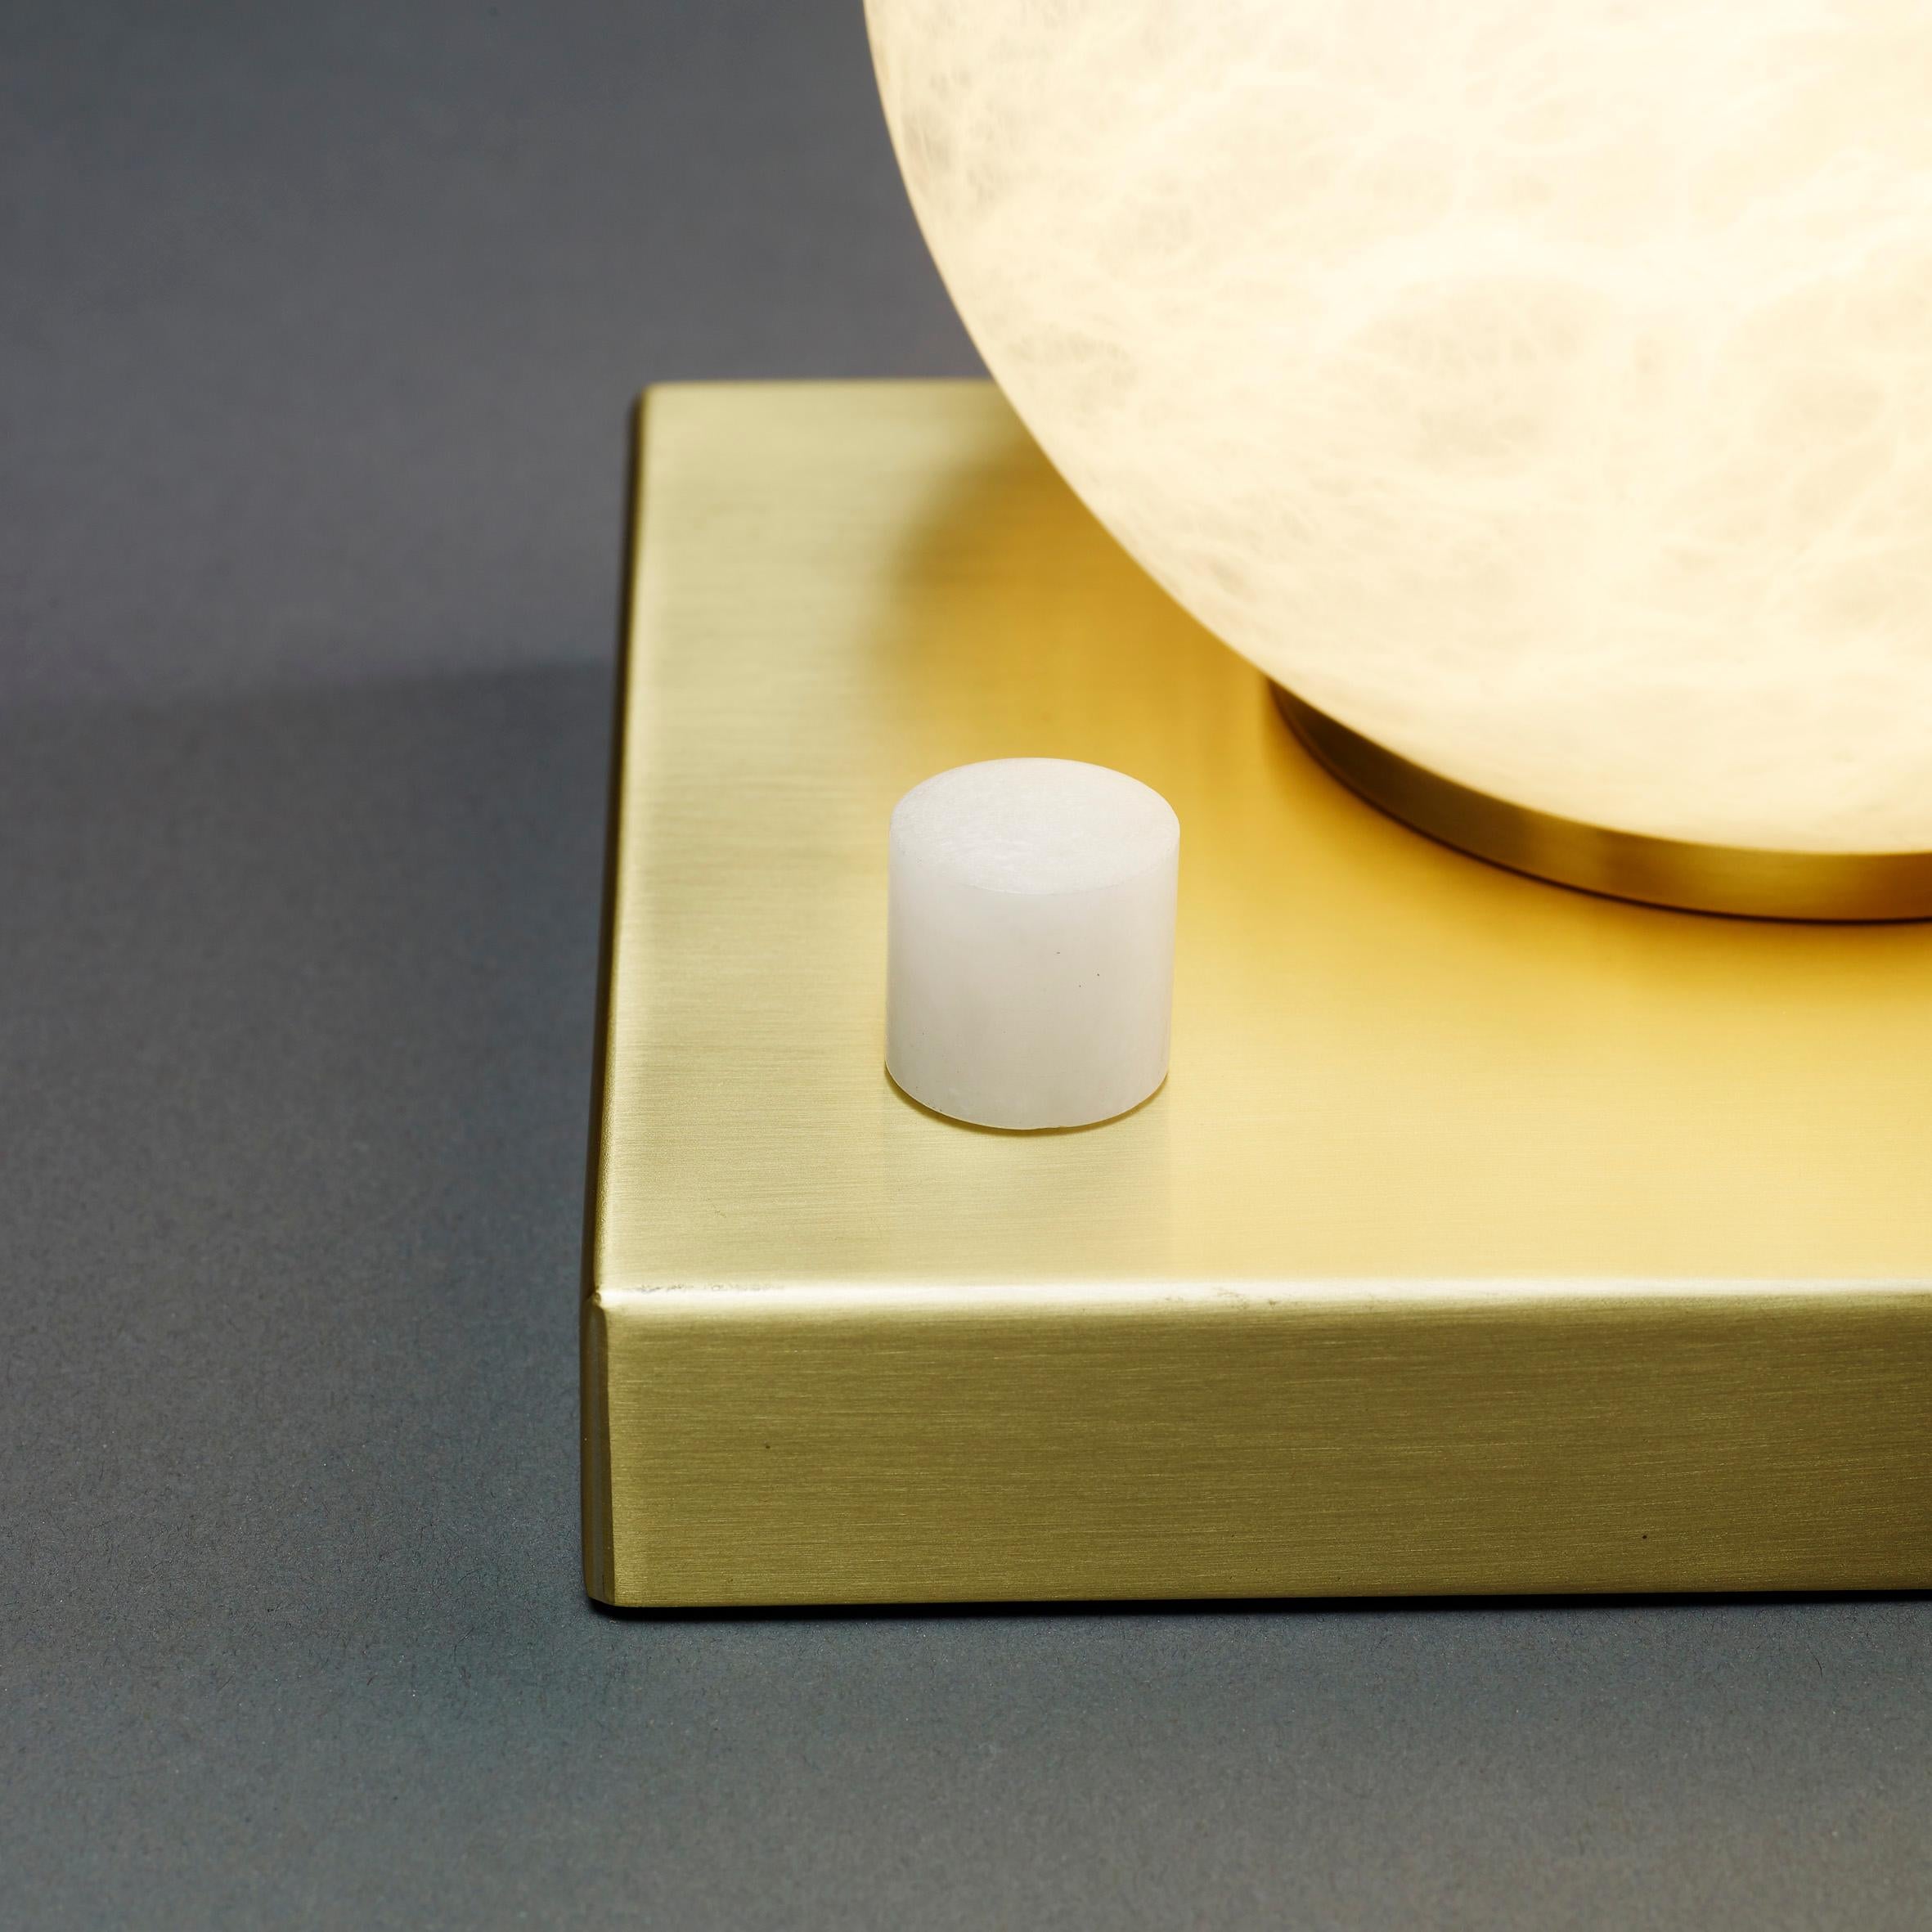 Cosulich Interiors in collaboration with Matlight Studio, this organic dimmable table lamp with square base, part of the Alabaster Moon Collection, entirely handmade in Italy, emphasizes the properties of alabaster as a diffuser, with its warm color